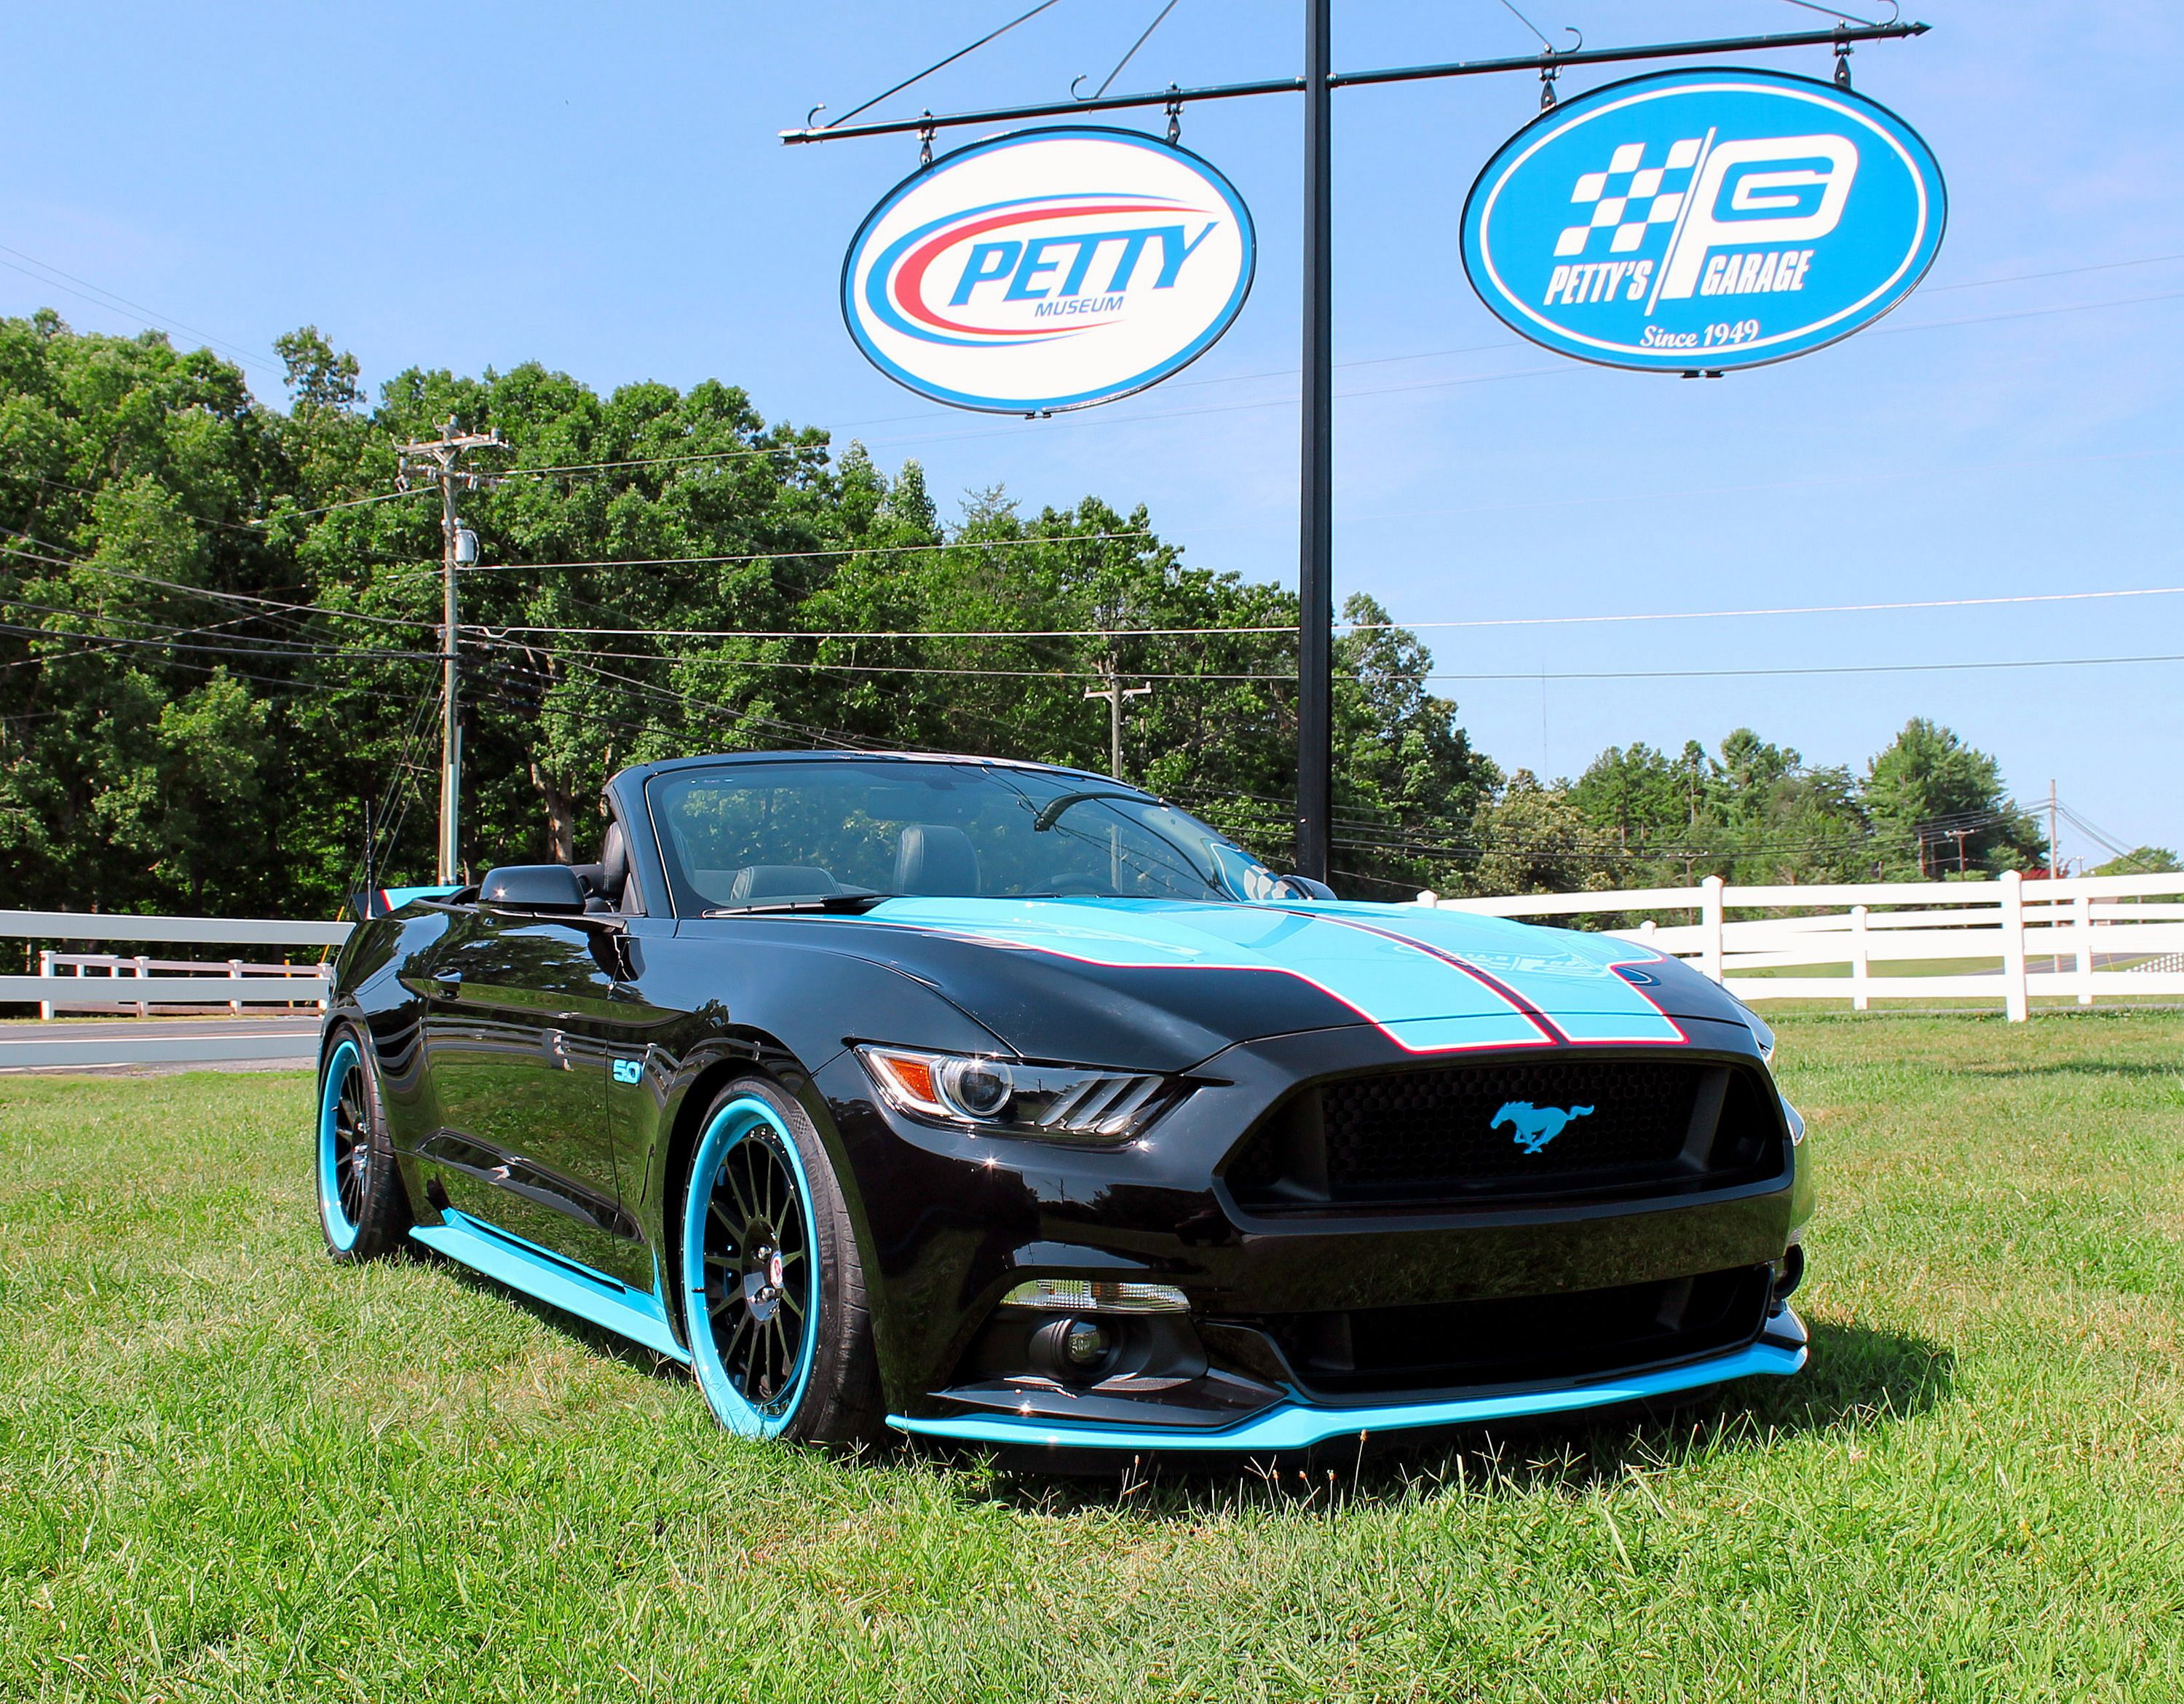 2016 Ford Mustang GT King Edition By Petty's Garage